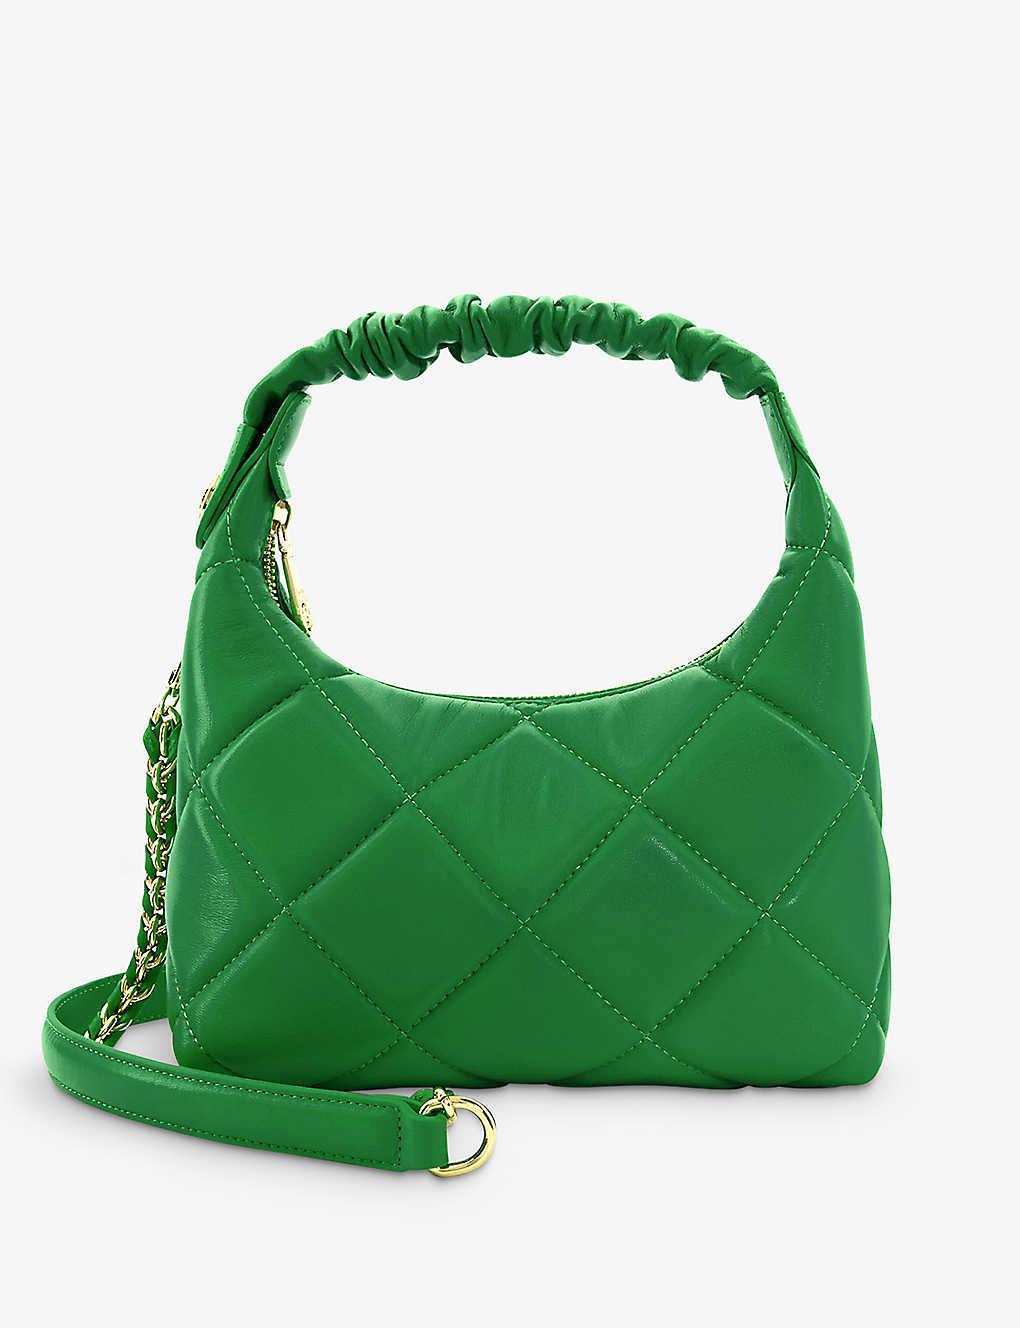 Dune Duchess Medium Quilted Leather Shoulder Bag in Green | Lyst